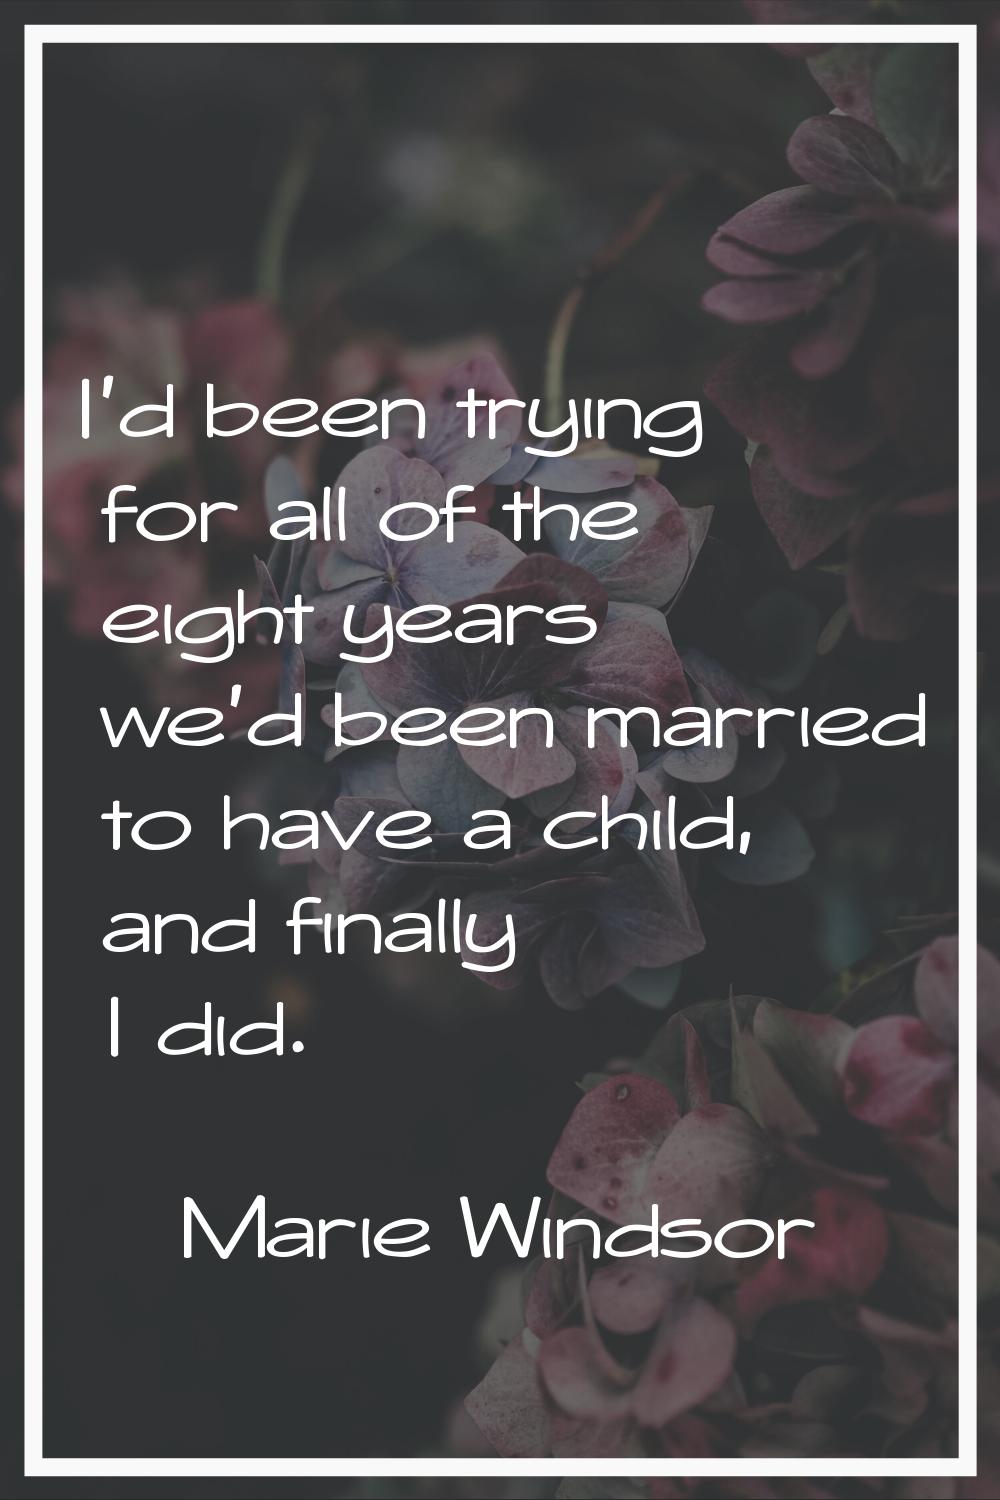 I'd been trying for all of the eight years we'd been married to have a child, and finally I did.